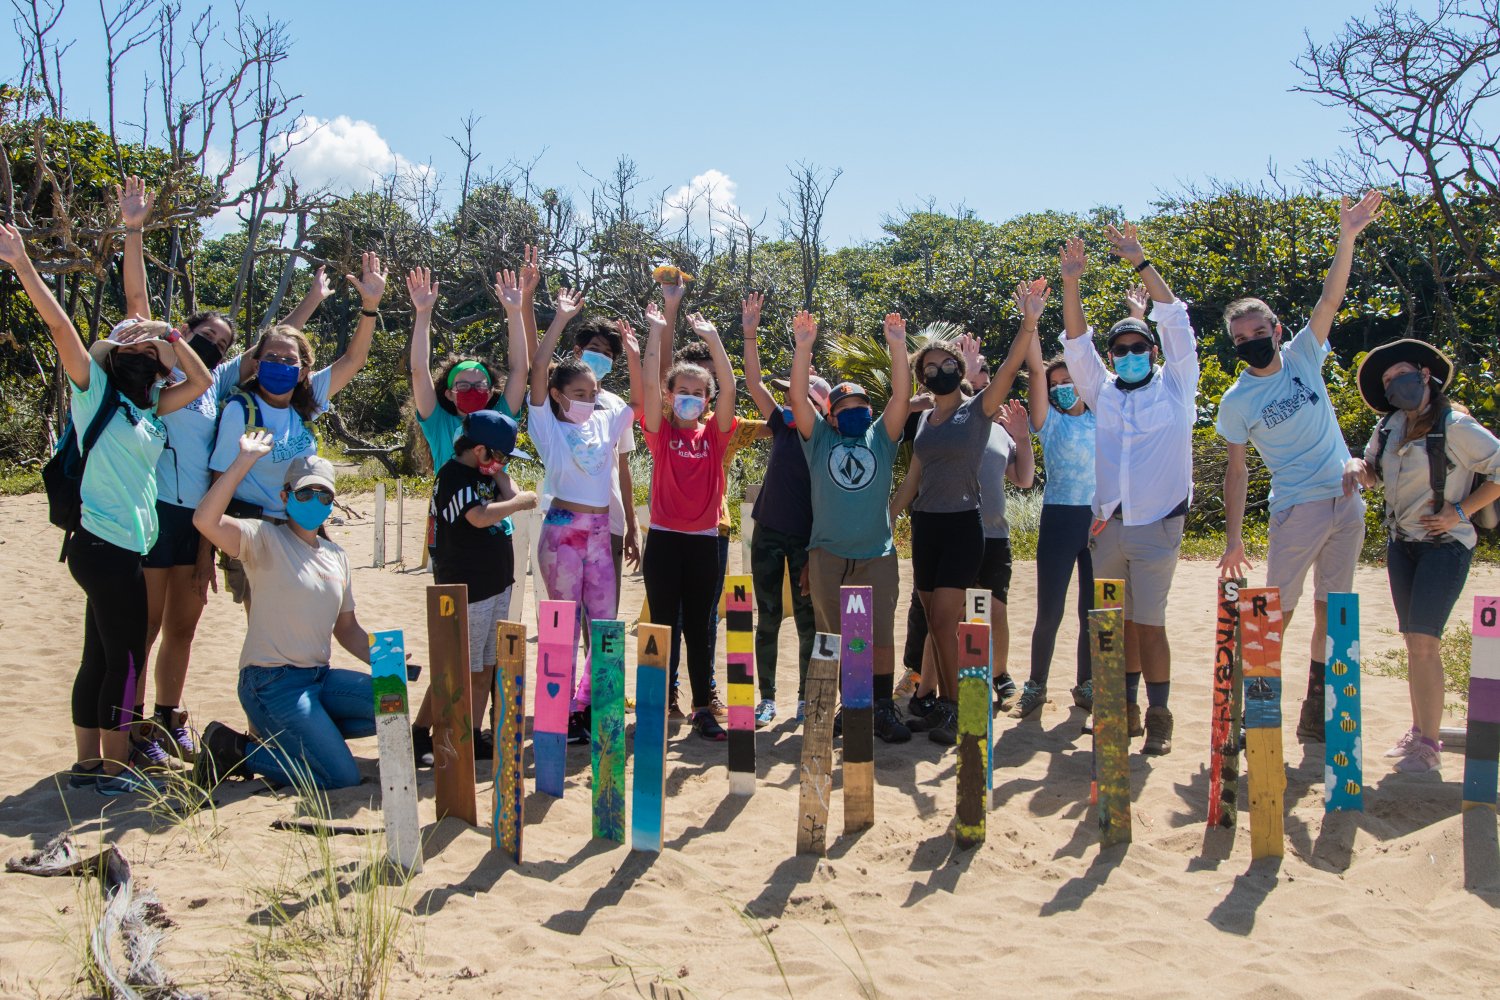 DUNAS partners host an annual immersive education youth workshop. 